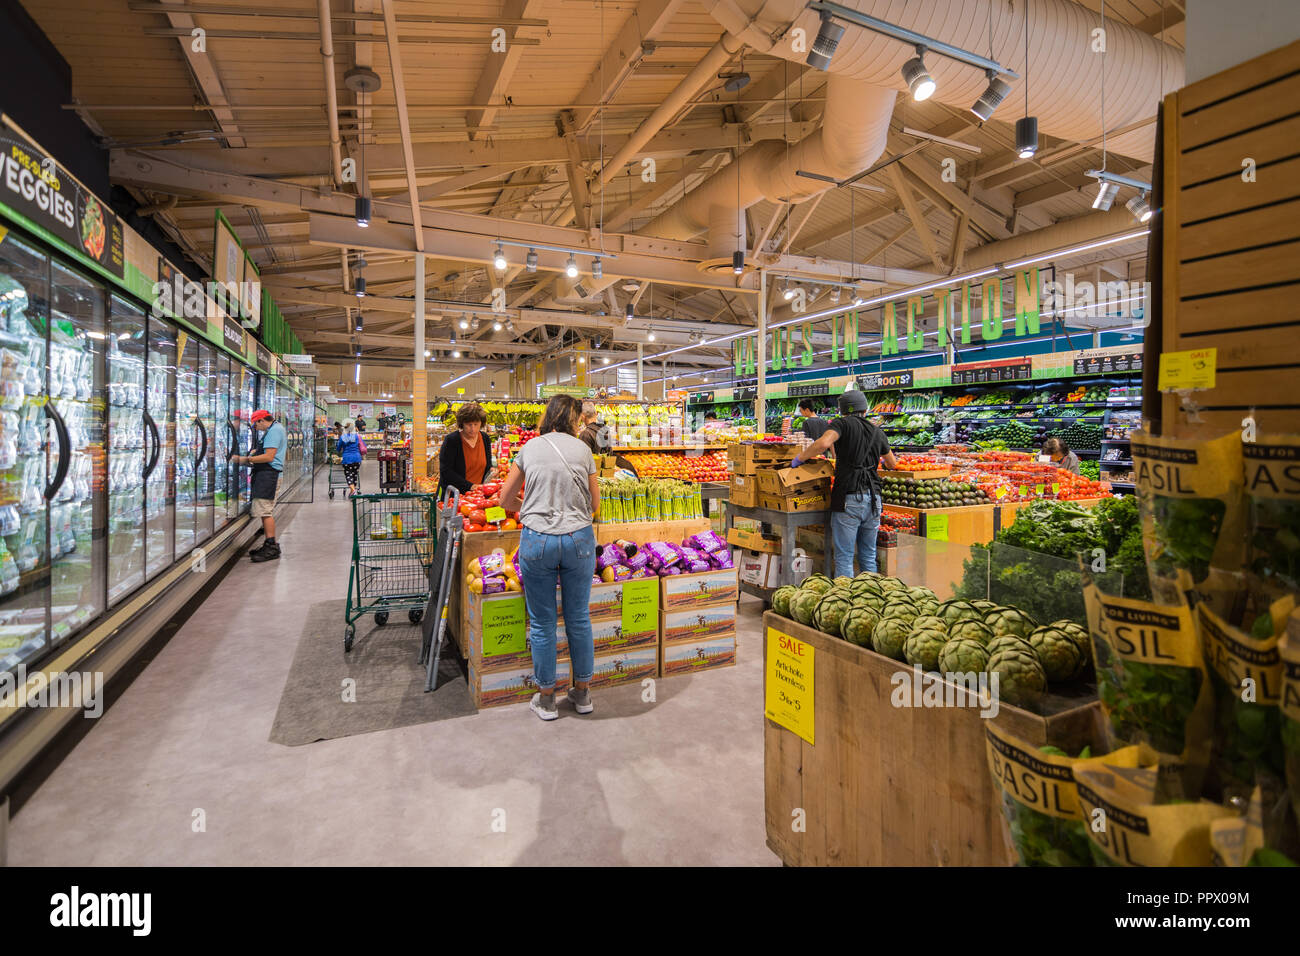 September 27, 2018 Palo Alto / CA / USA - People shopping at Whole Foods in the fruits and vegetables section, south San Francisco bay area Stock Photo